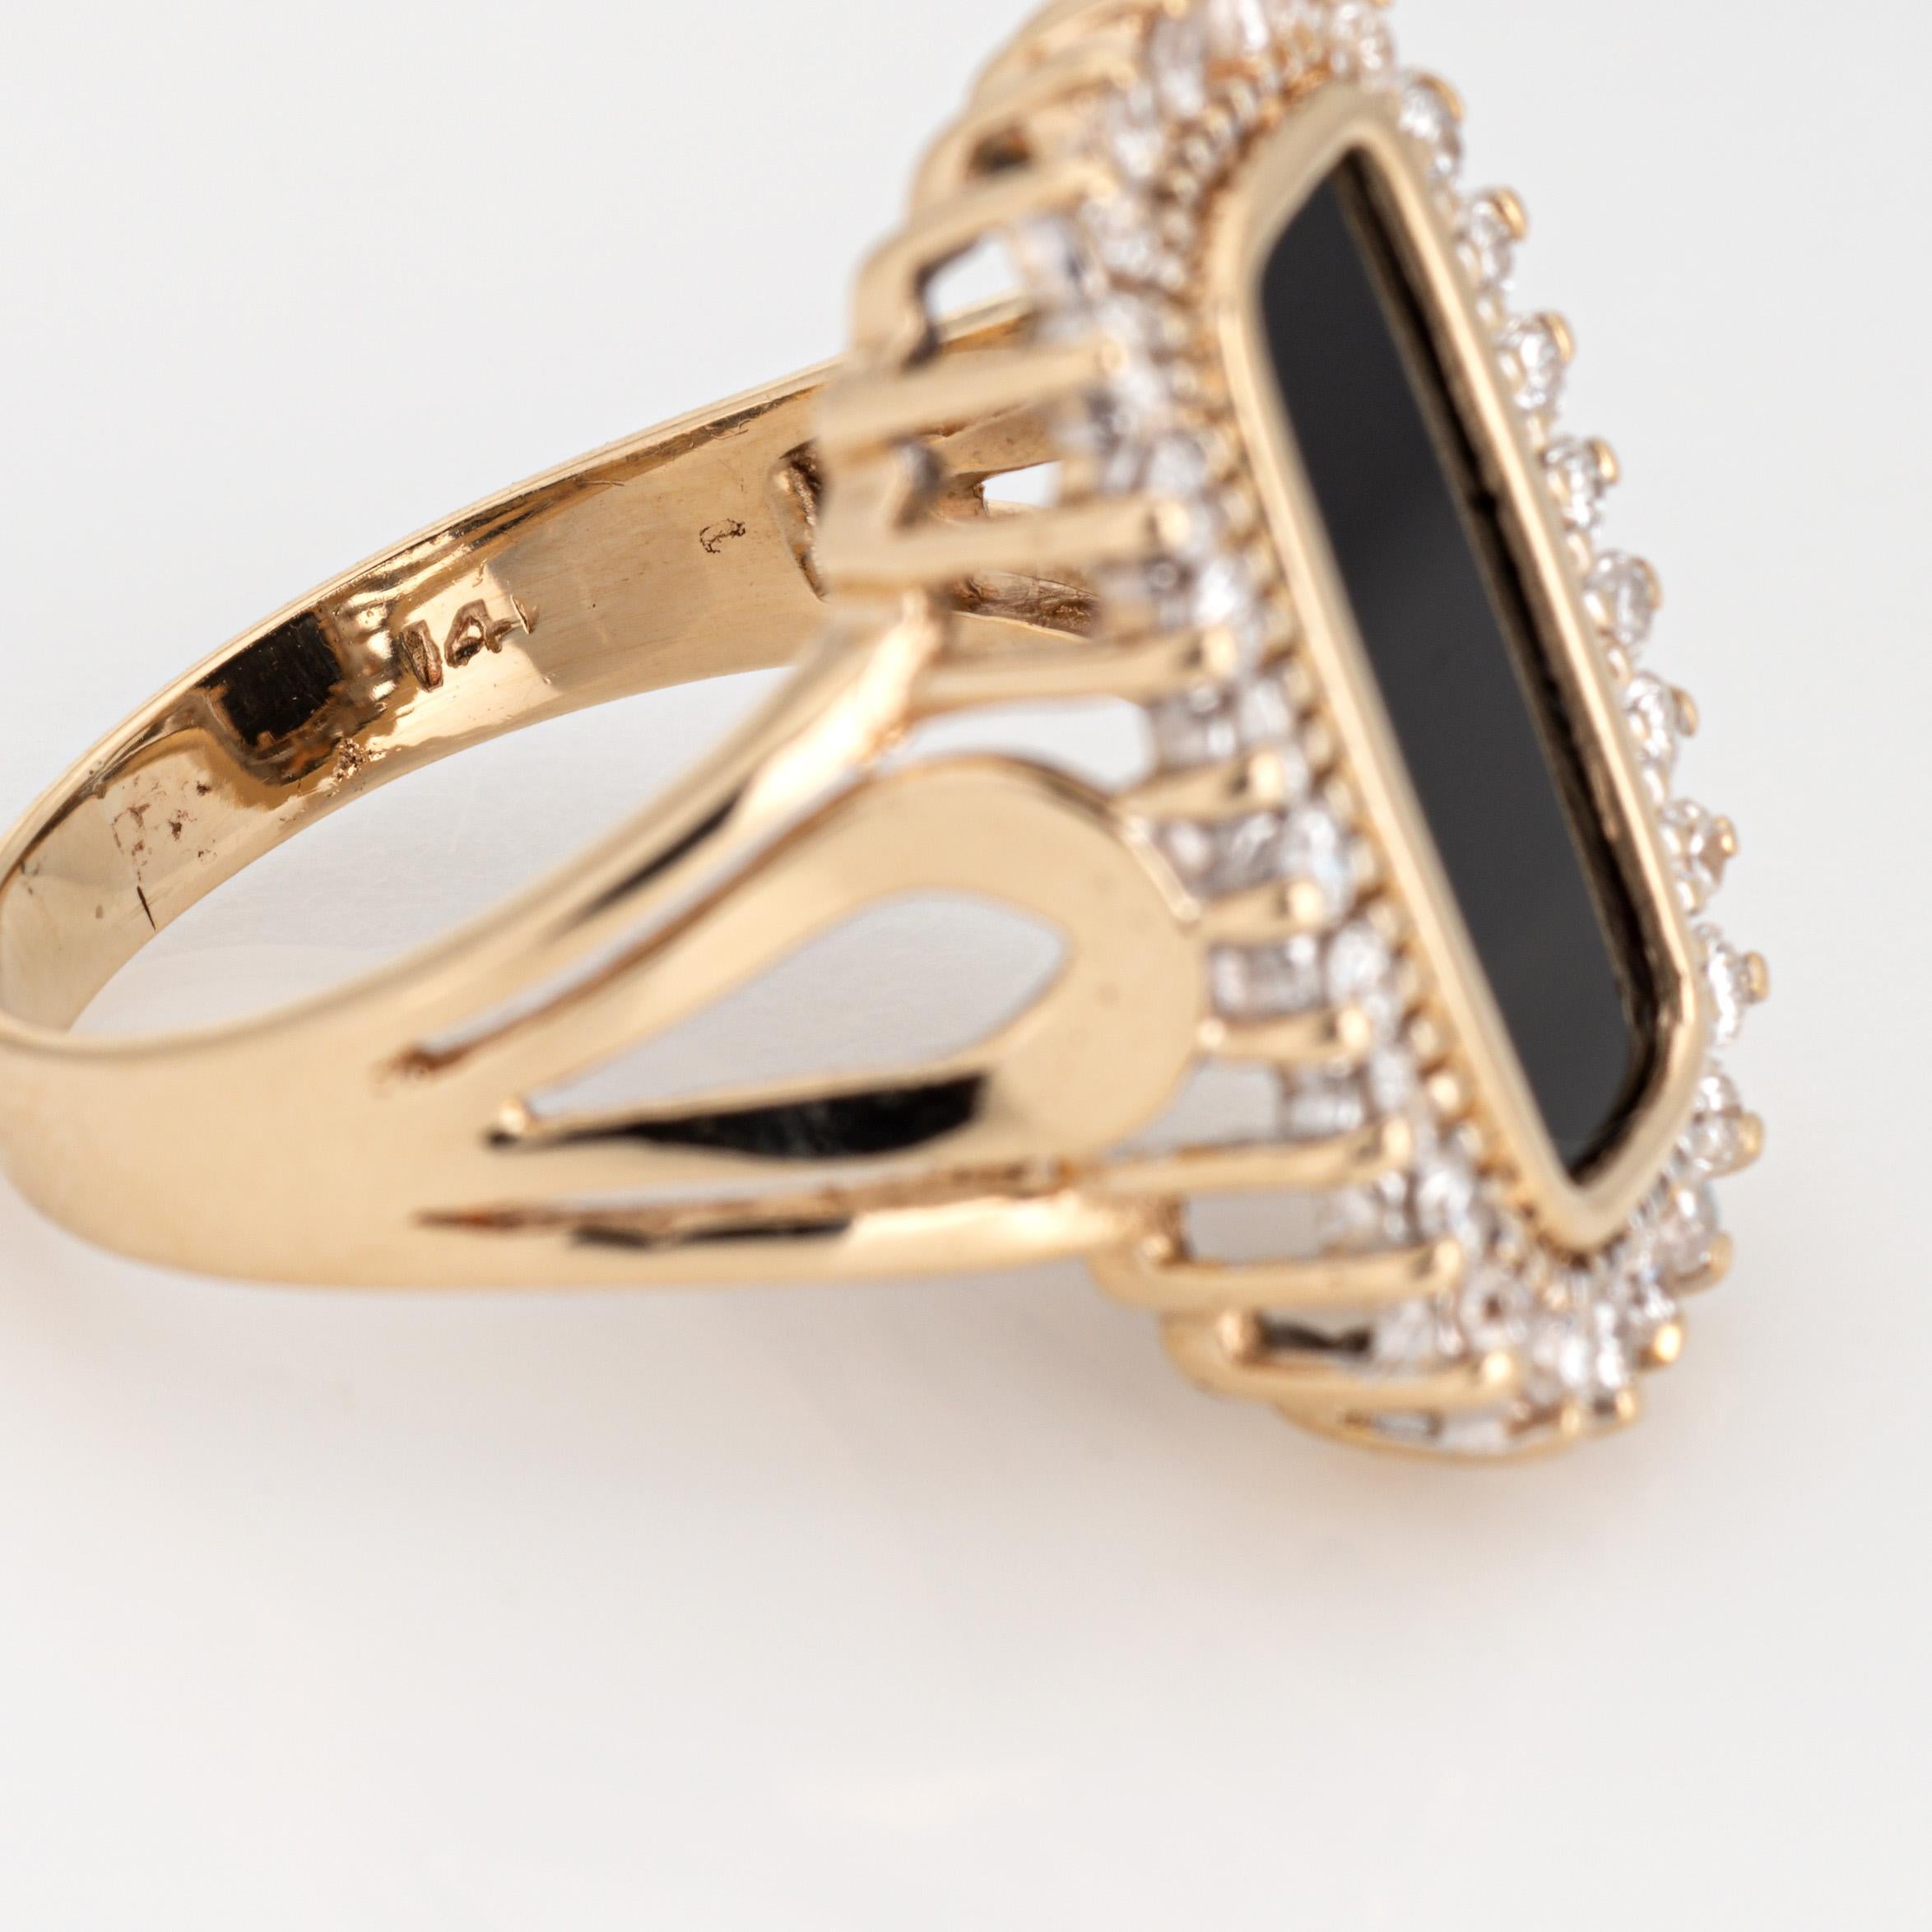 Onyx Diamond Ring Vintage 14k Yellow Gold Sz 7.75 Elonged Square Cocktail  For Sale 1